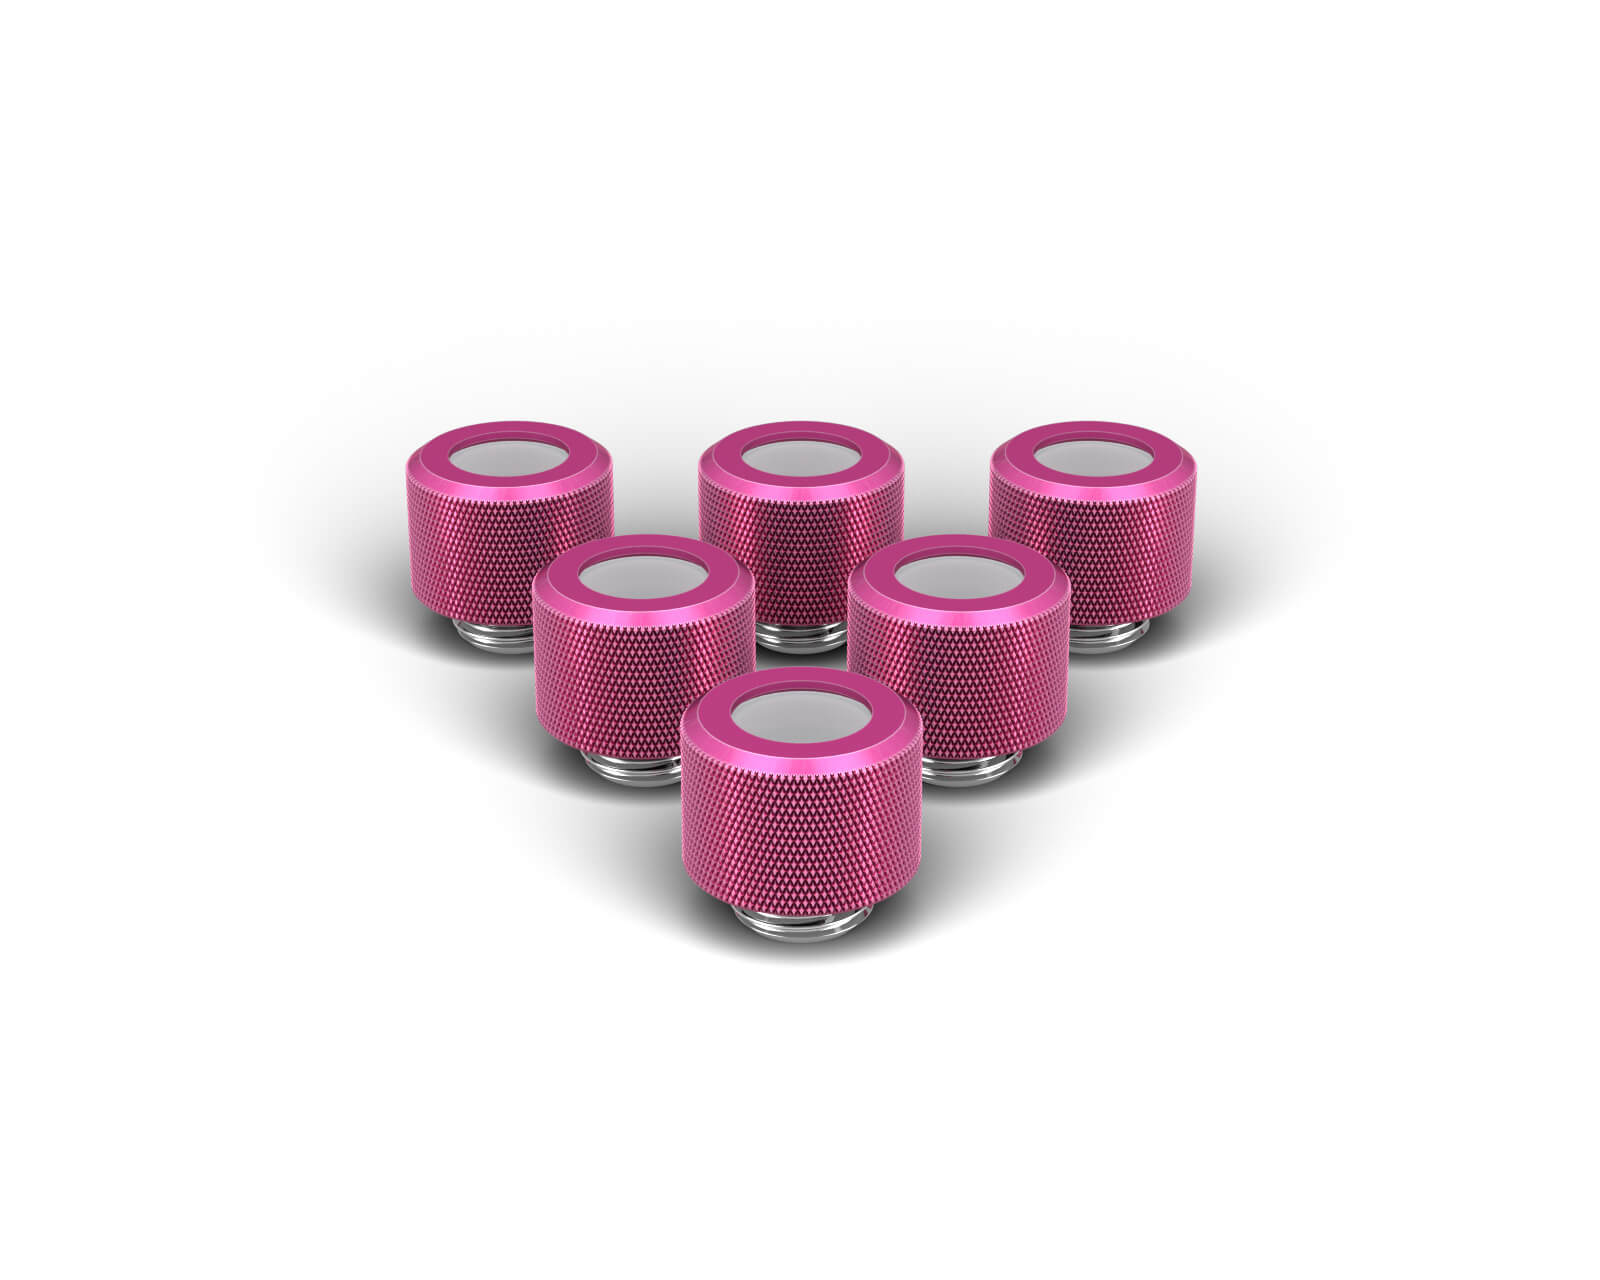 PrimoChill 12mm OD Rigid SX Fitting - 6 Pack - PrimoChill - KEEPING IT COOL Candy Pink